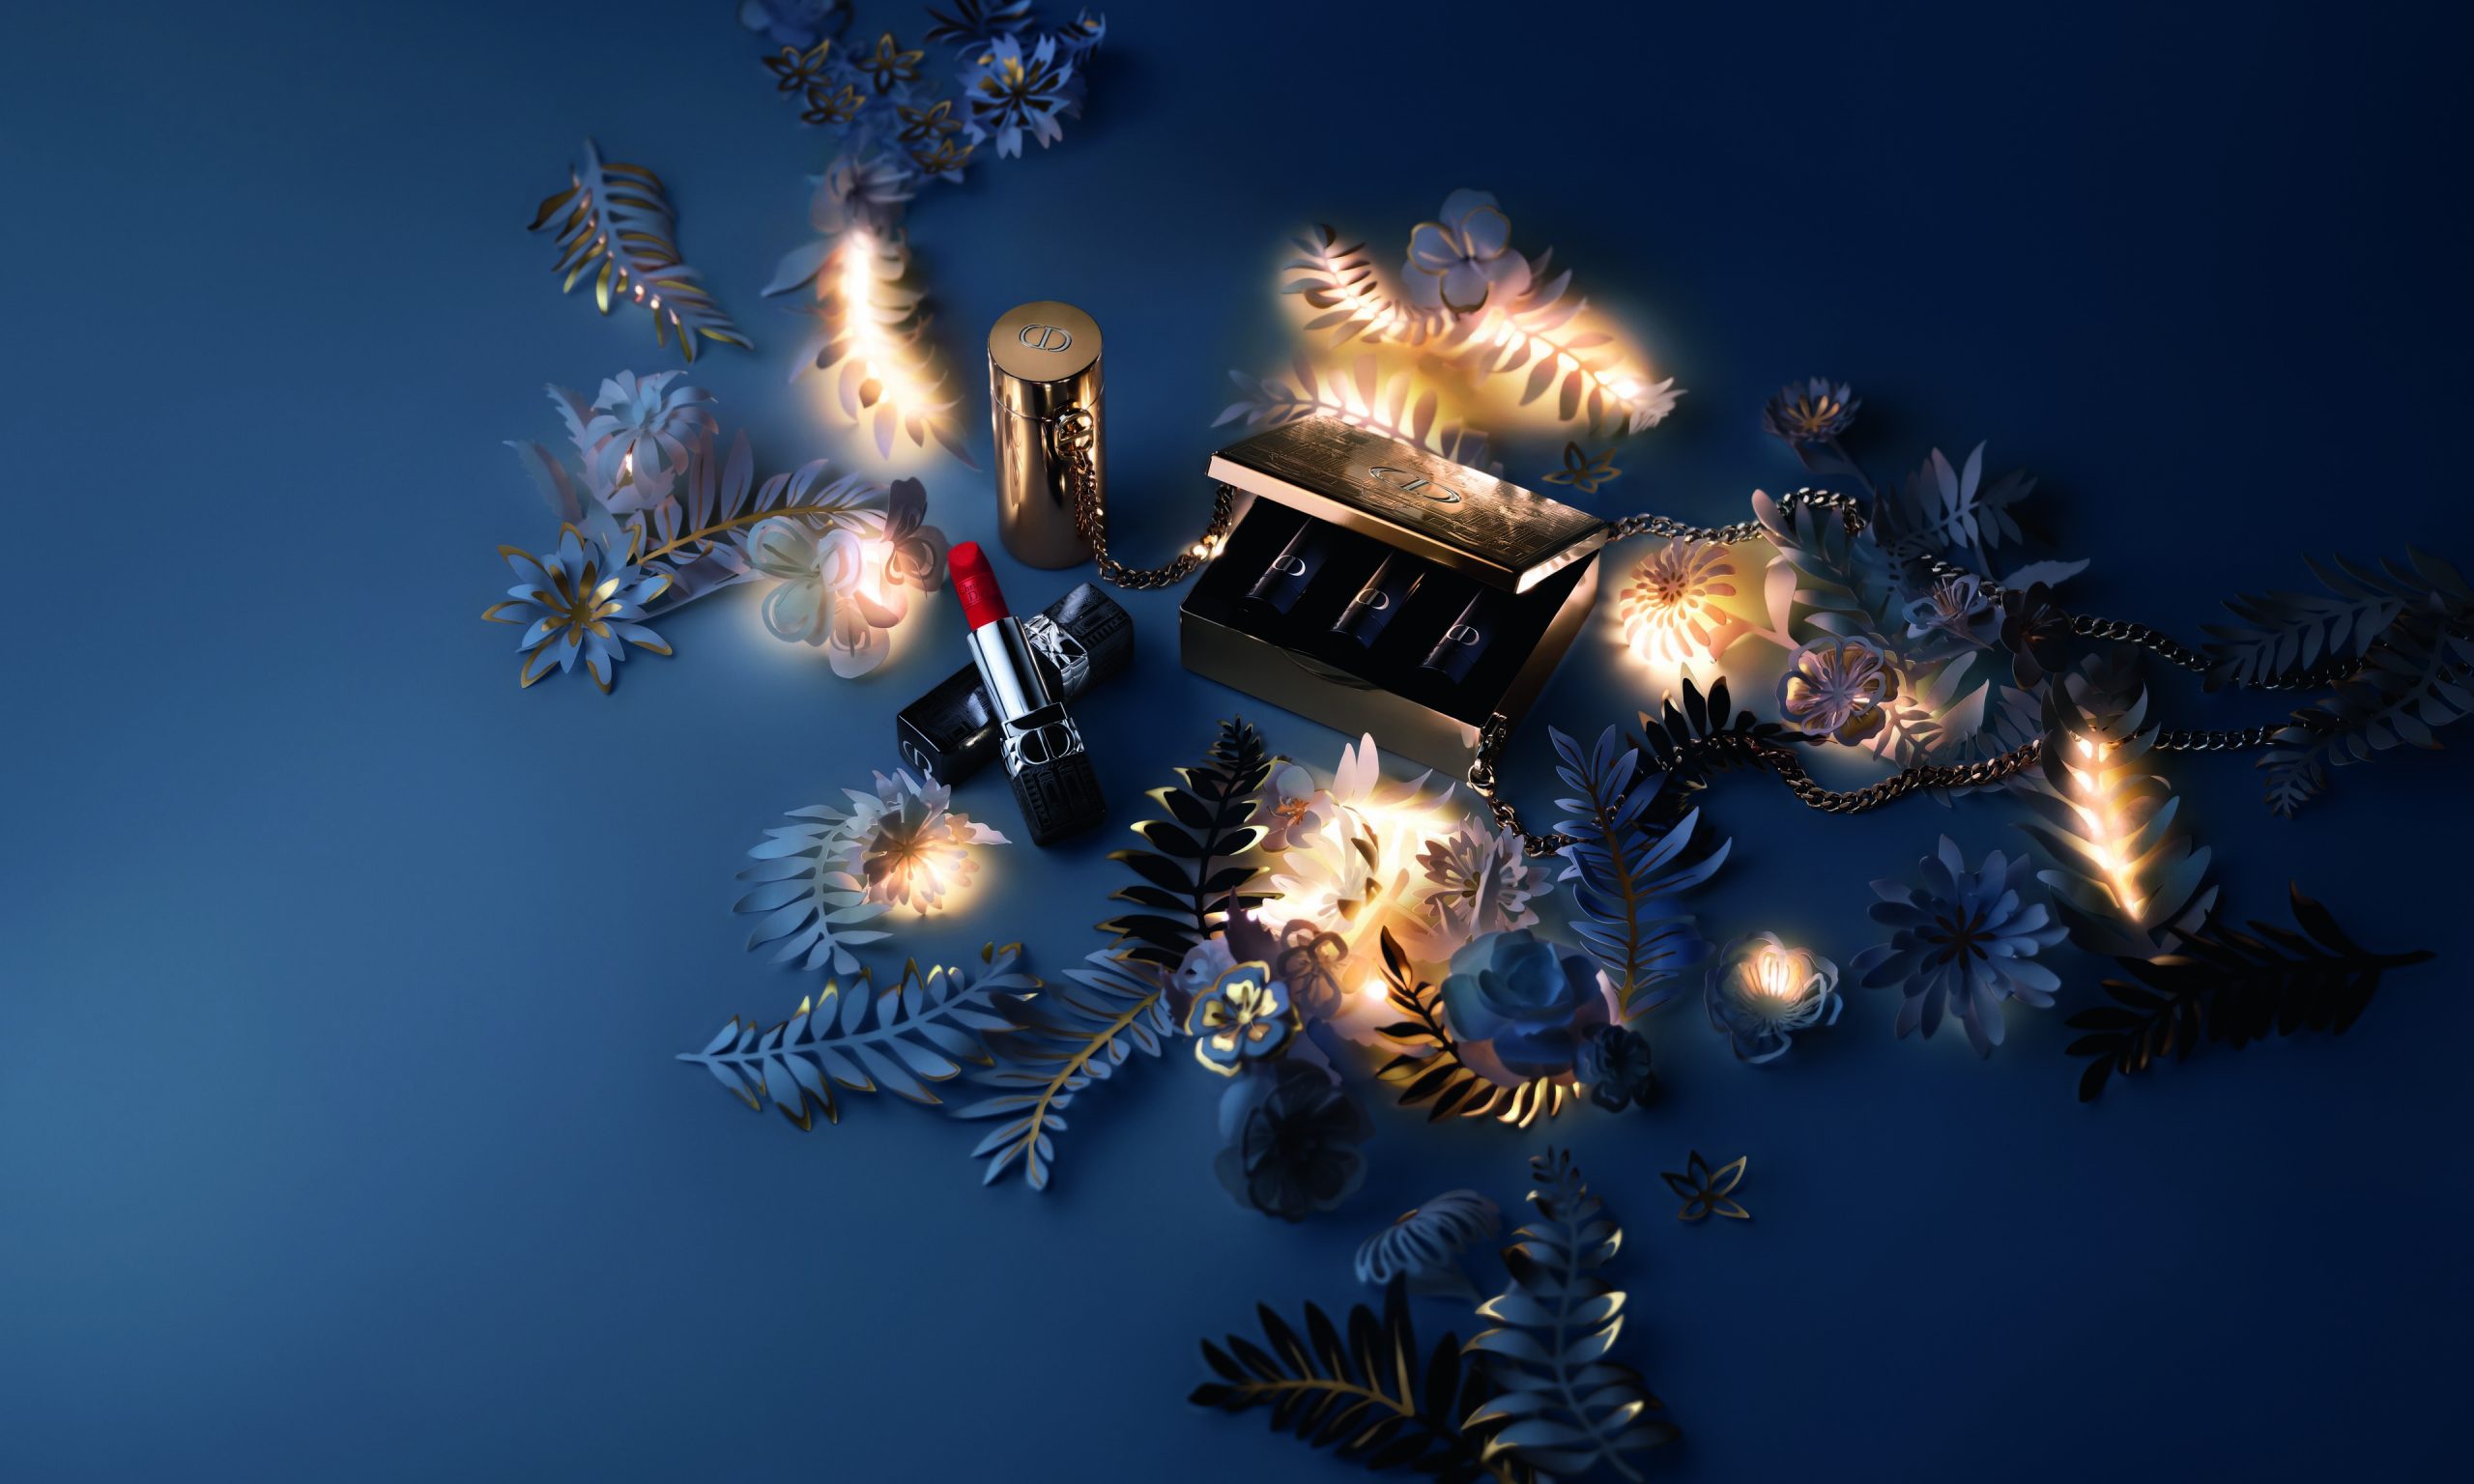 Louis Vuitton curates luxury gifts for your loved ones this Holiday season